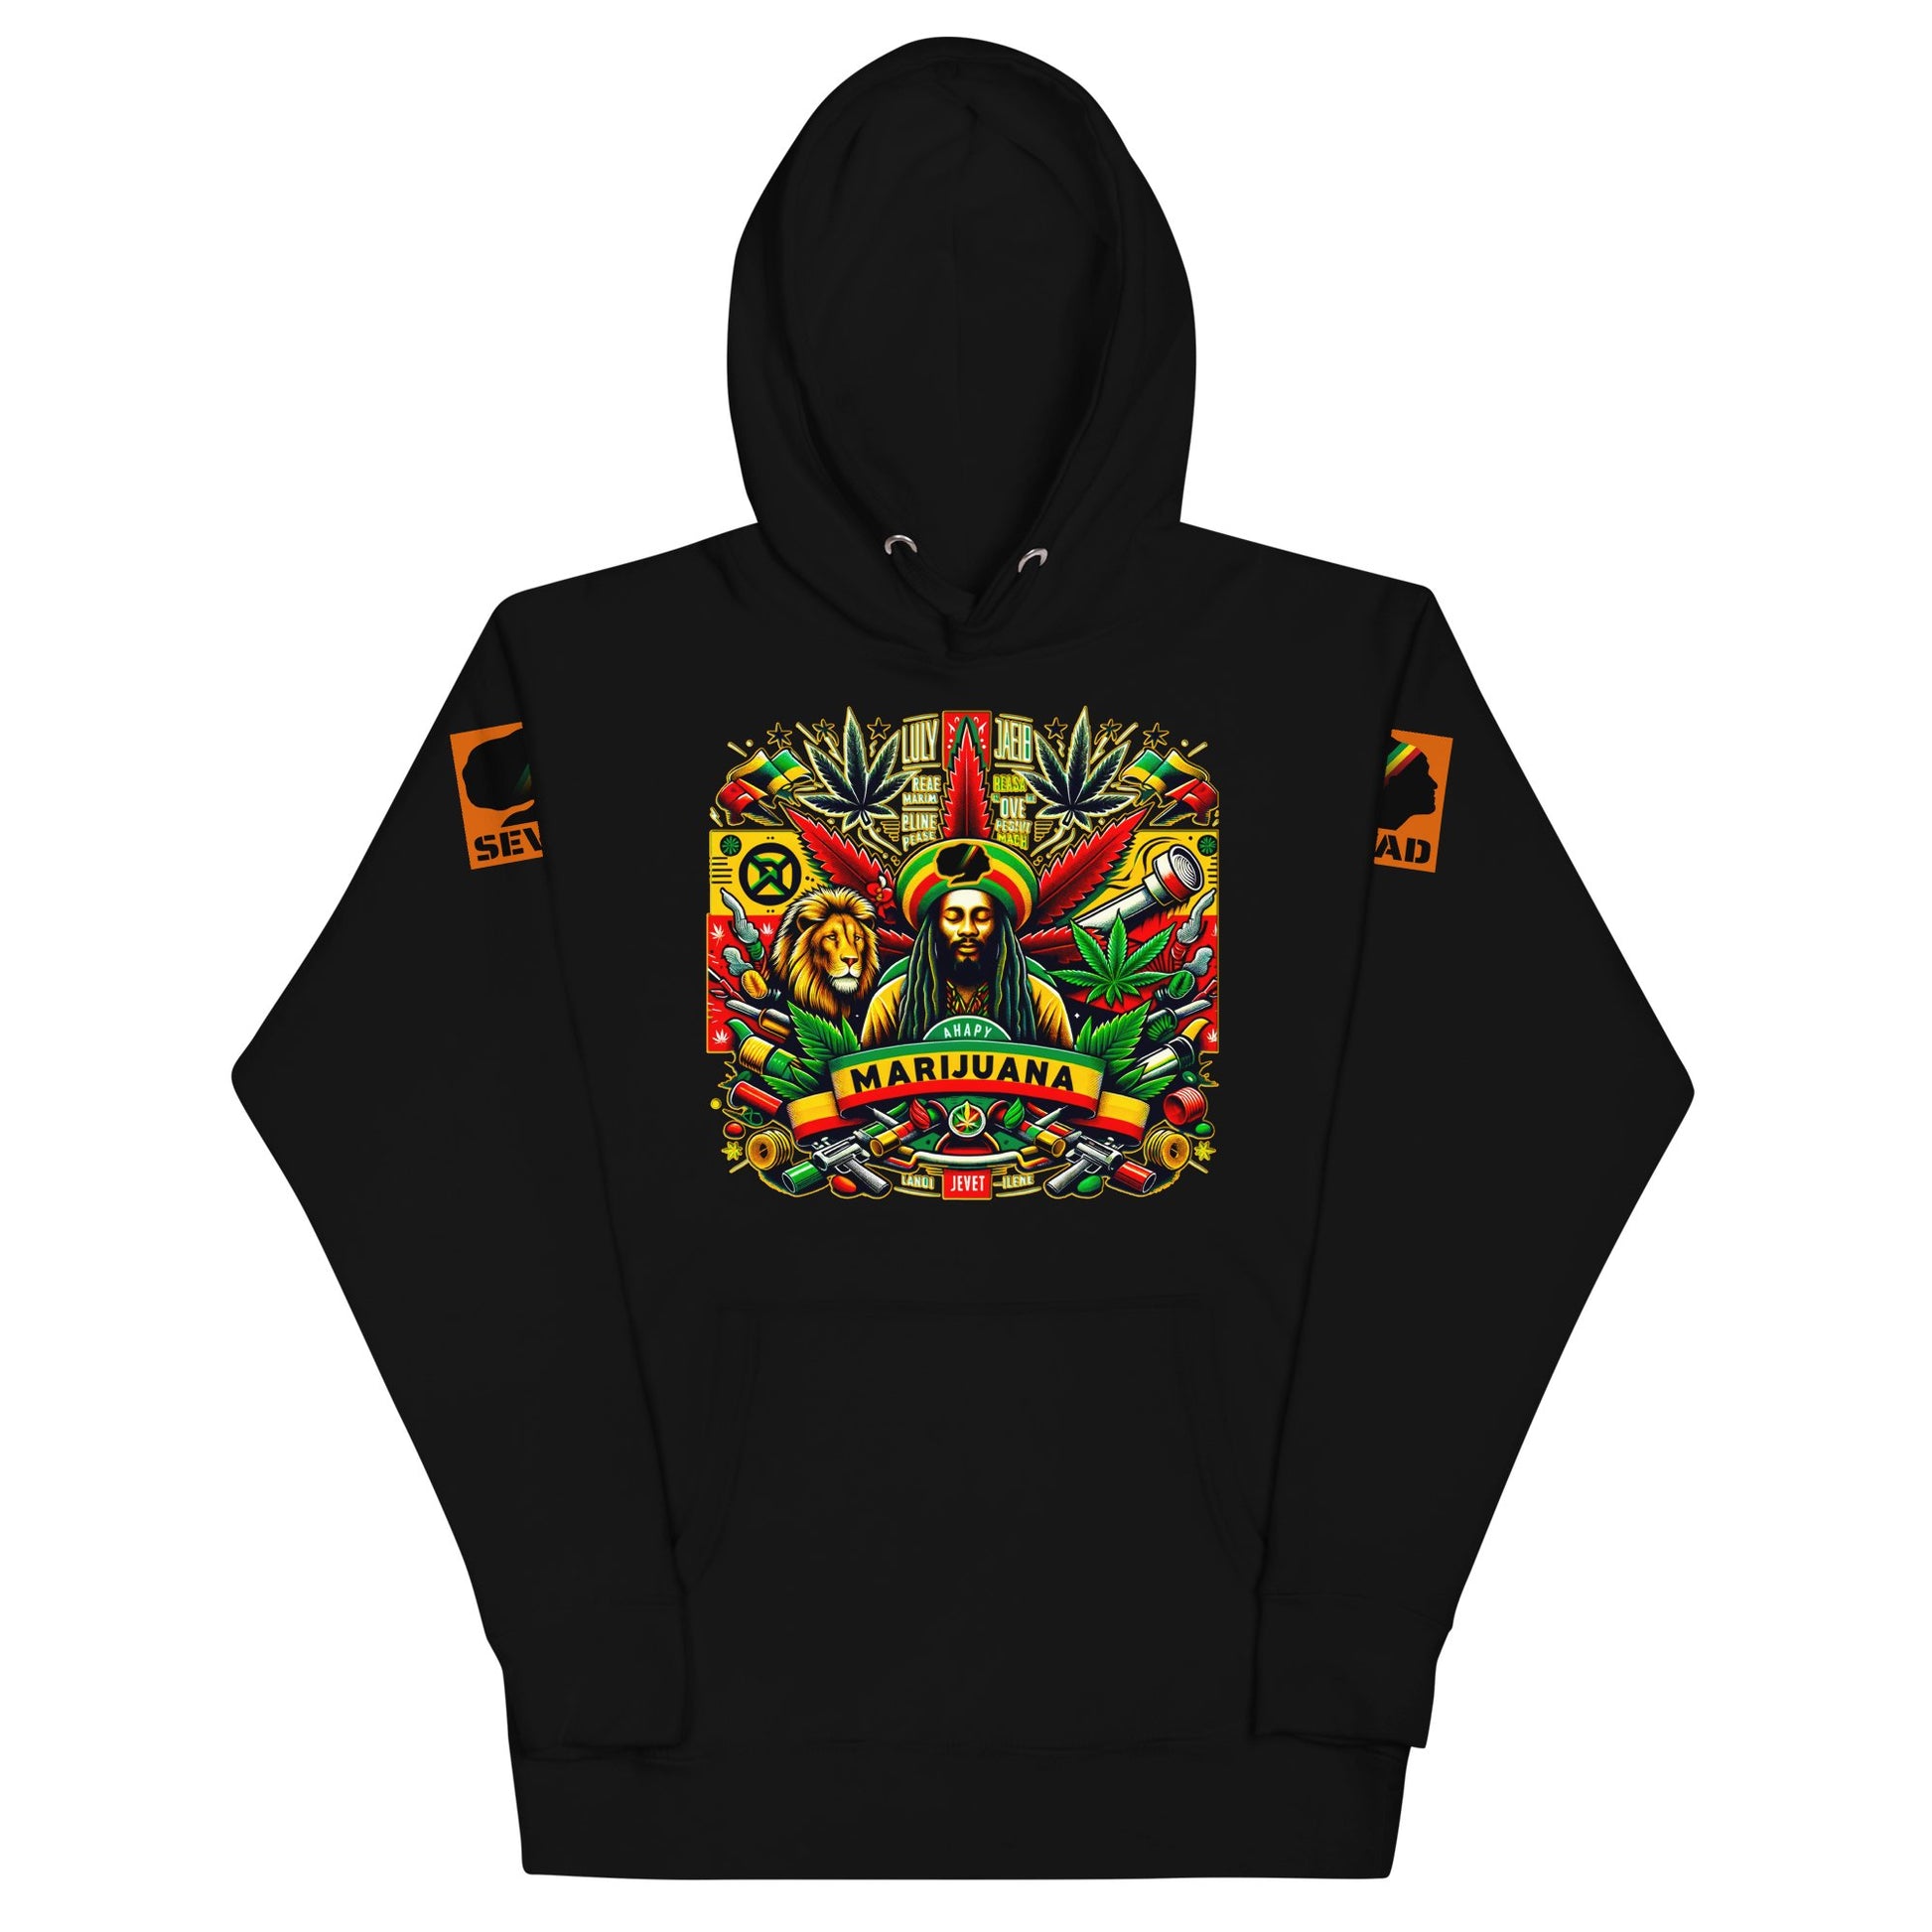 Riddims of the Root: Unisex Hoodie - SEVAD MUSIC HOUSE - Hoodie - SEVAD MUSIC HOUSE - 6351223_10779 - Black - S - Riddims of the Root: Unisex Hoodie